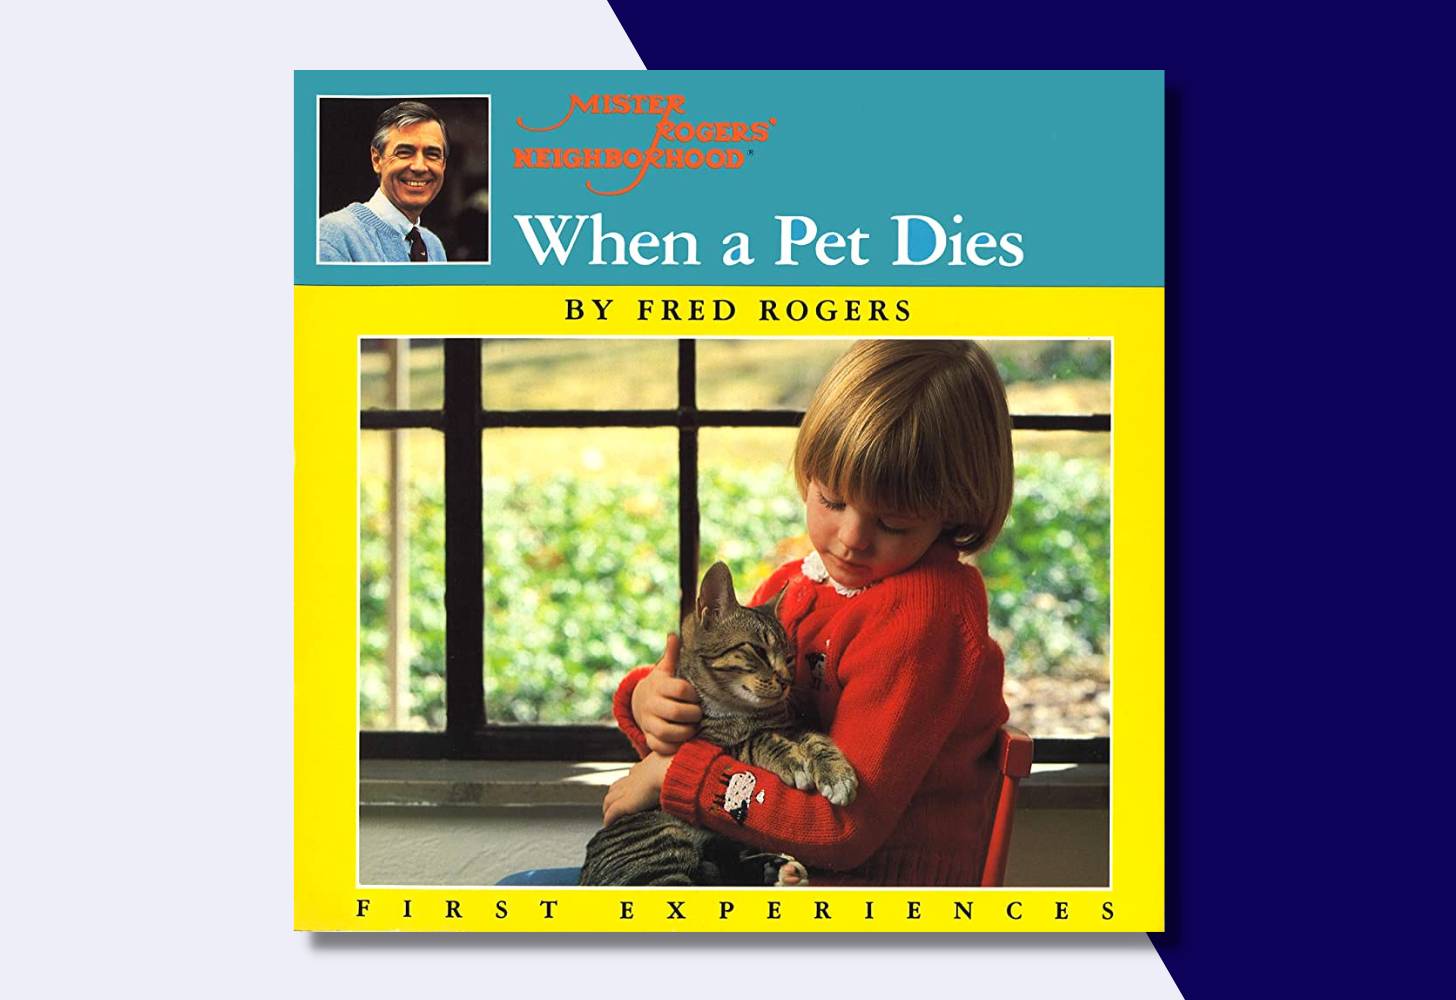 “When a Pet Dies” by Fred Rogers 